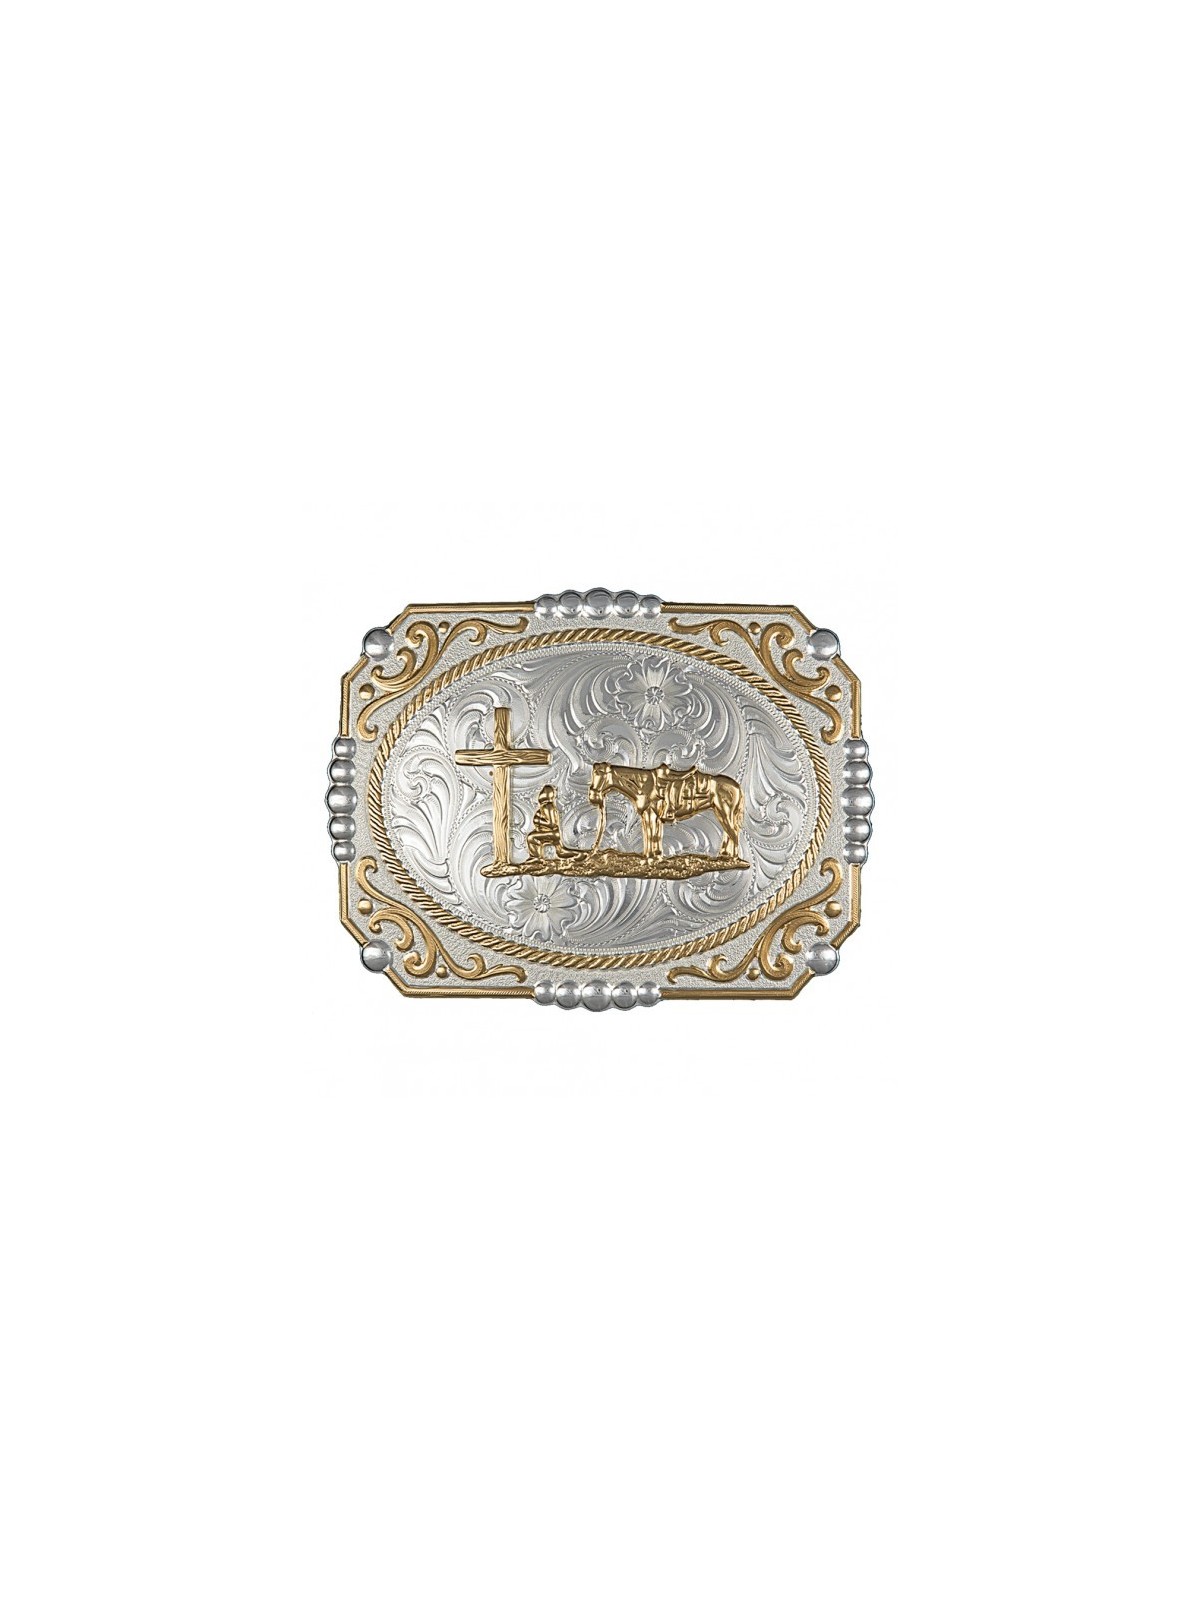 Two-tone Buckle with Cowboy